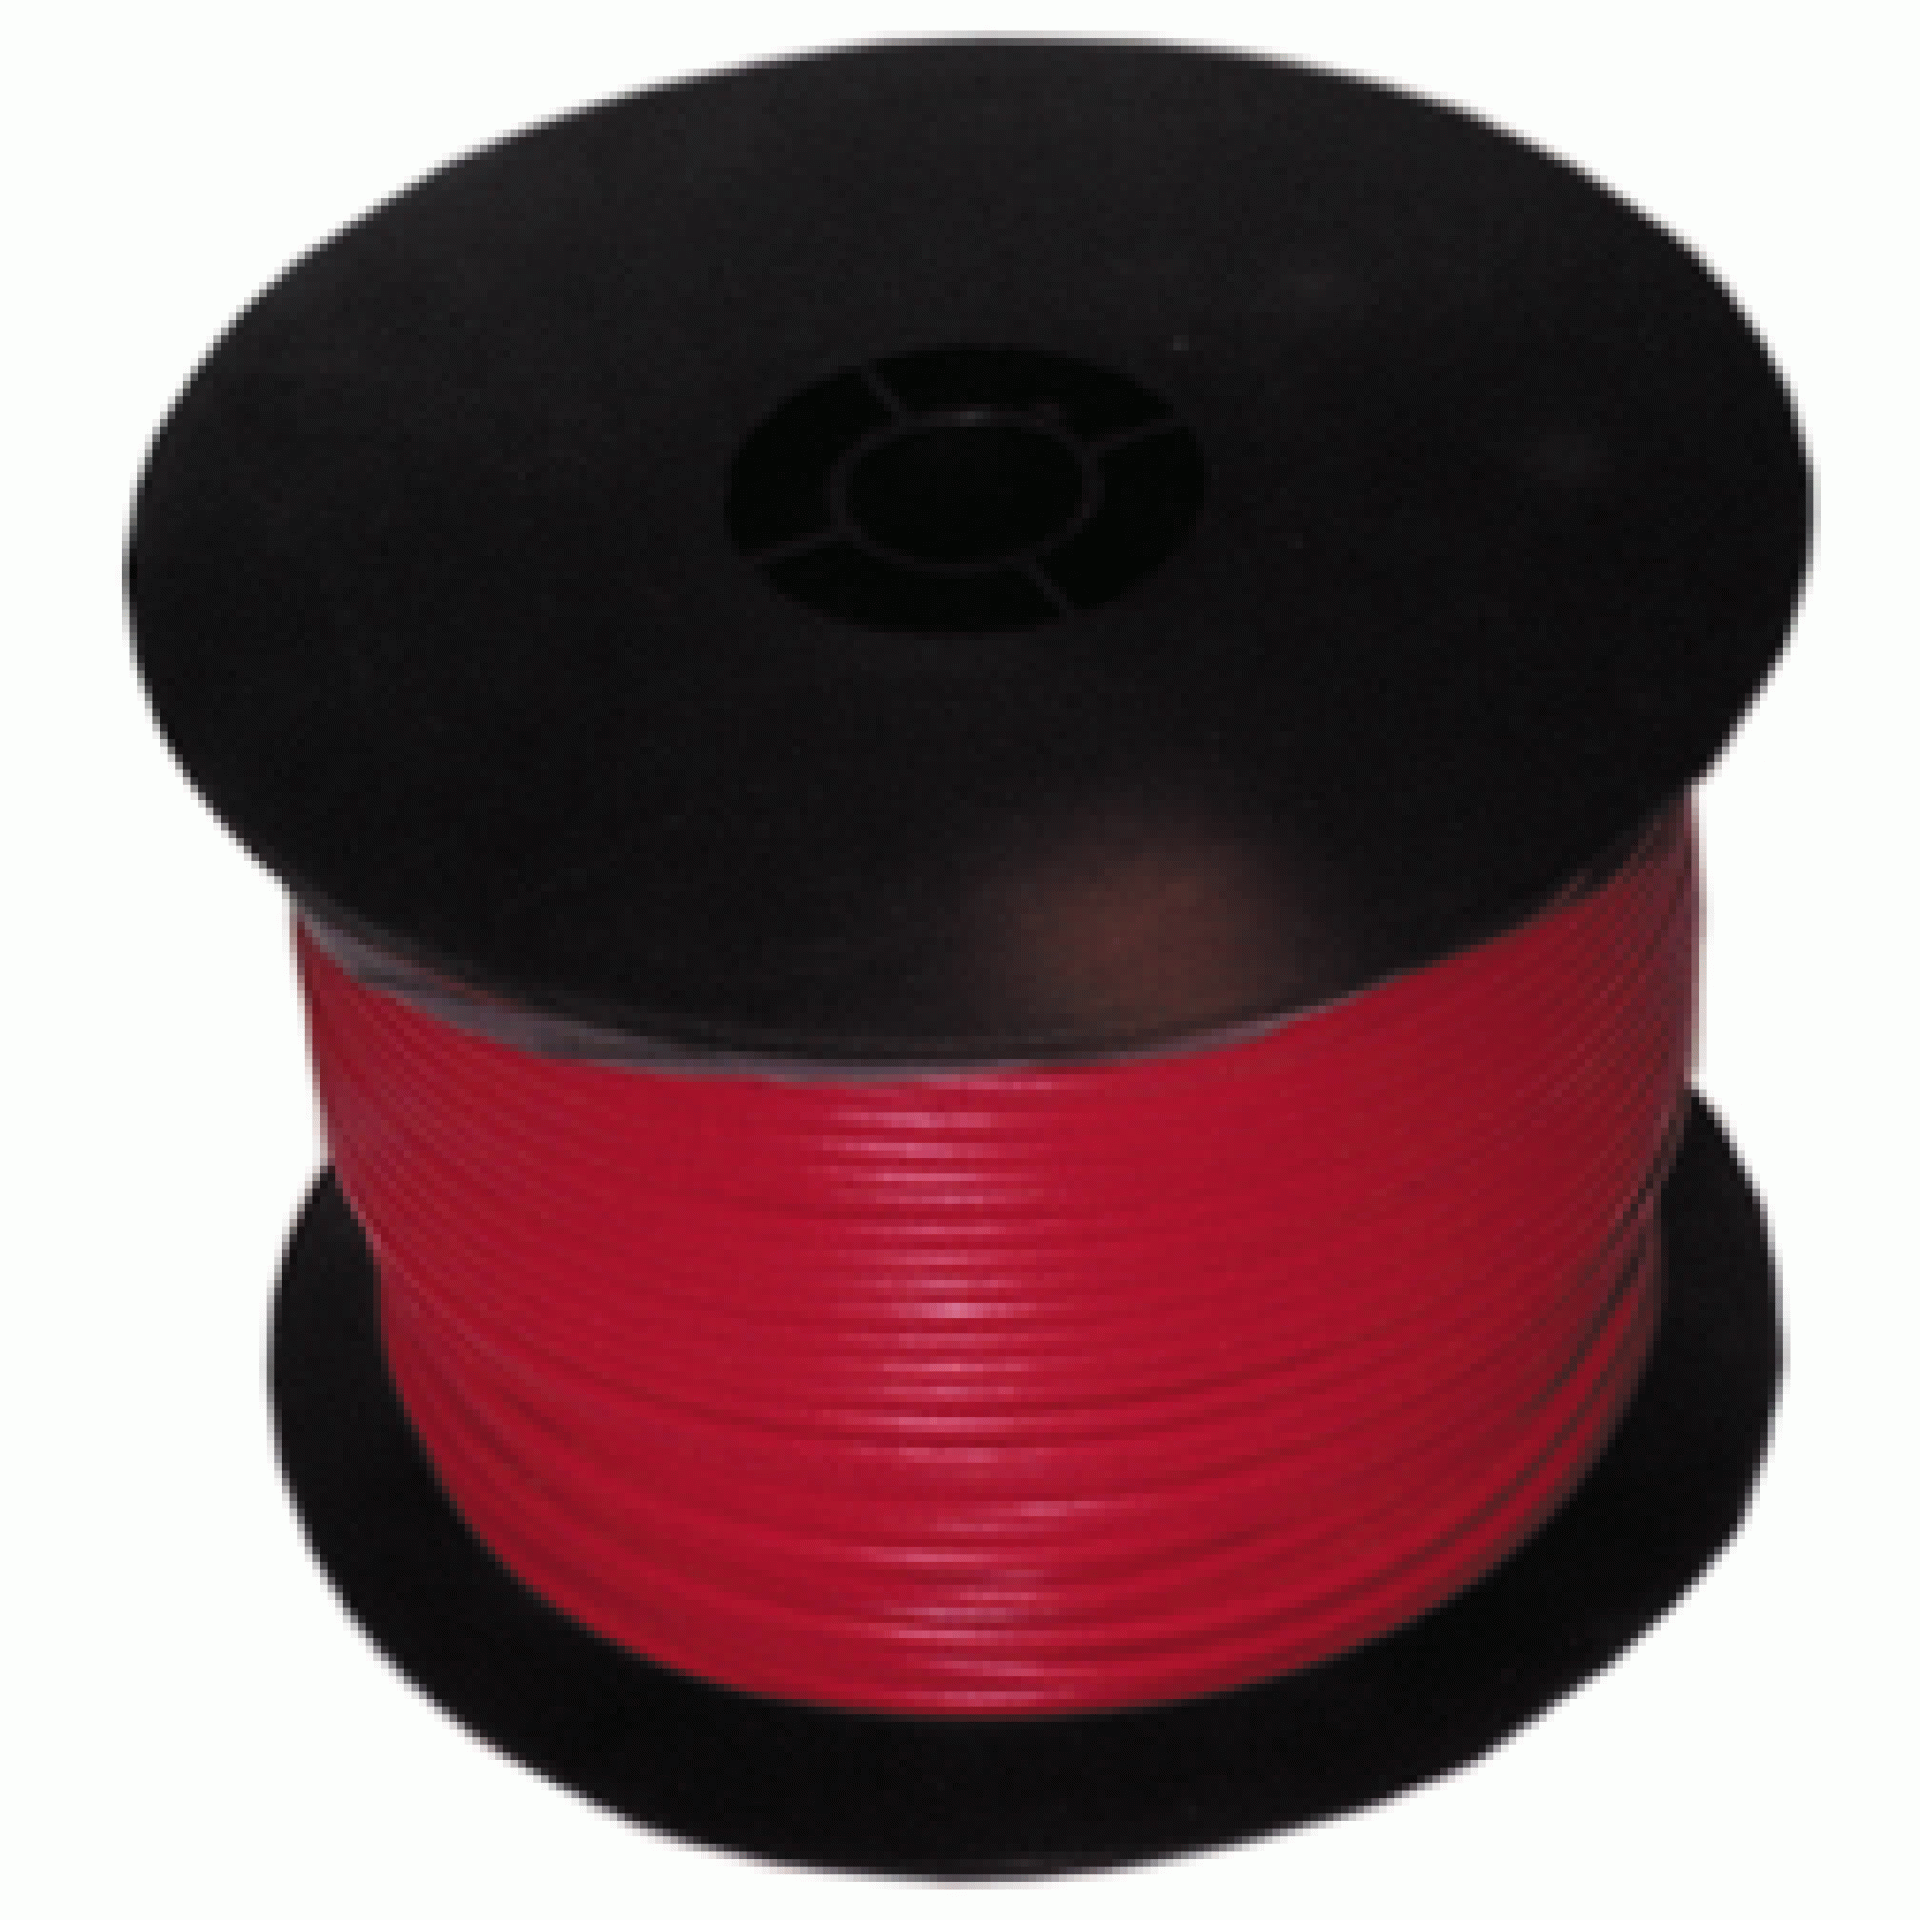 DEKA | 02422 | PRIMARY COPPER WIRE - RED - 14 GAUGE 500' SPOOLS